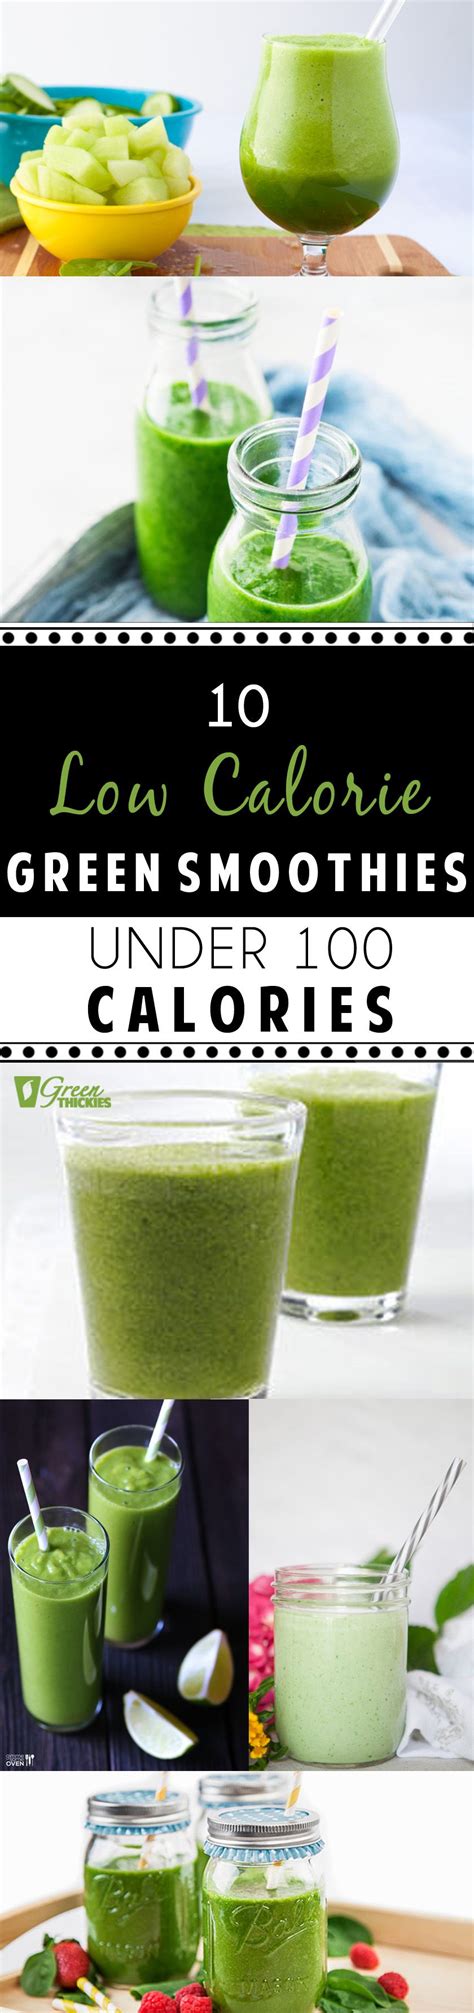 5 low sugar smoothies | healthy smoothies to power your day. 10 Low Calorie Green Smoothies Under 100 Calories | Under 100 calories, Healthy green smoothies ...